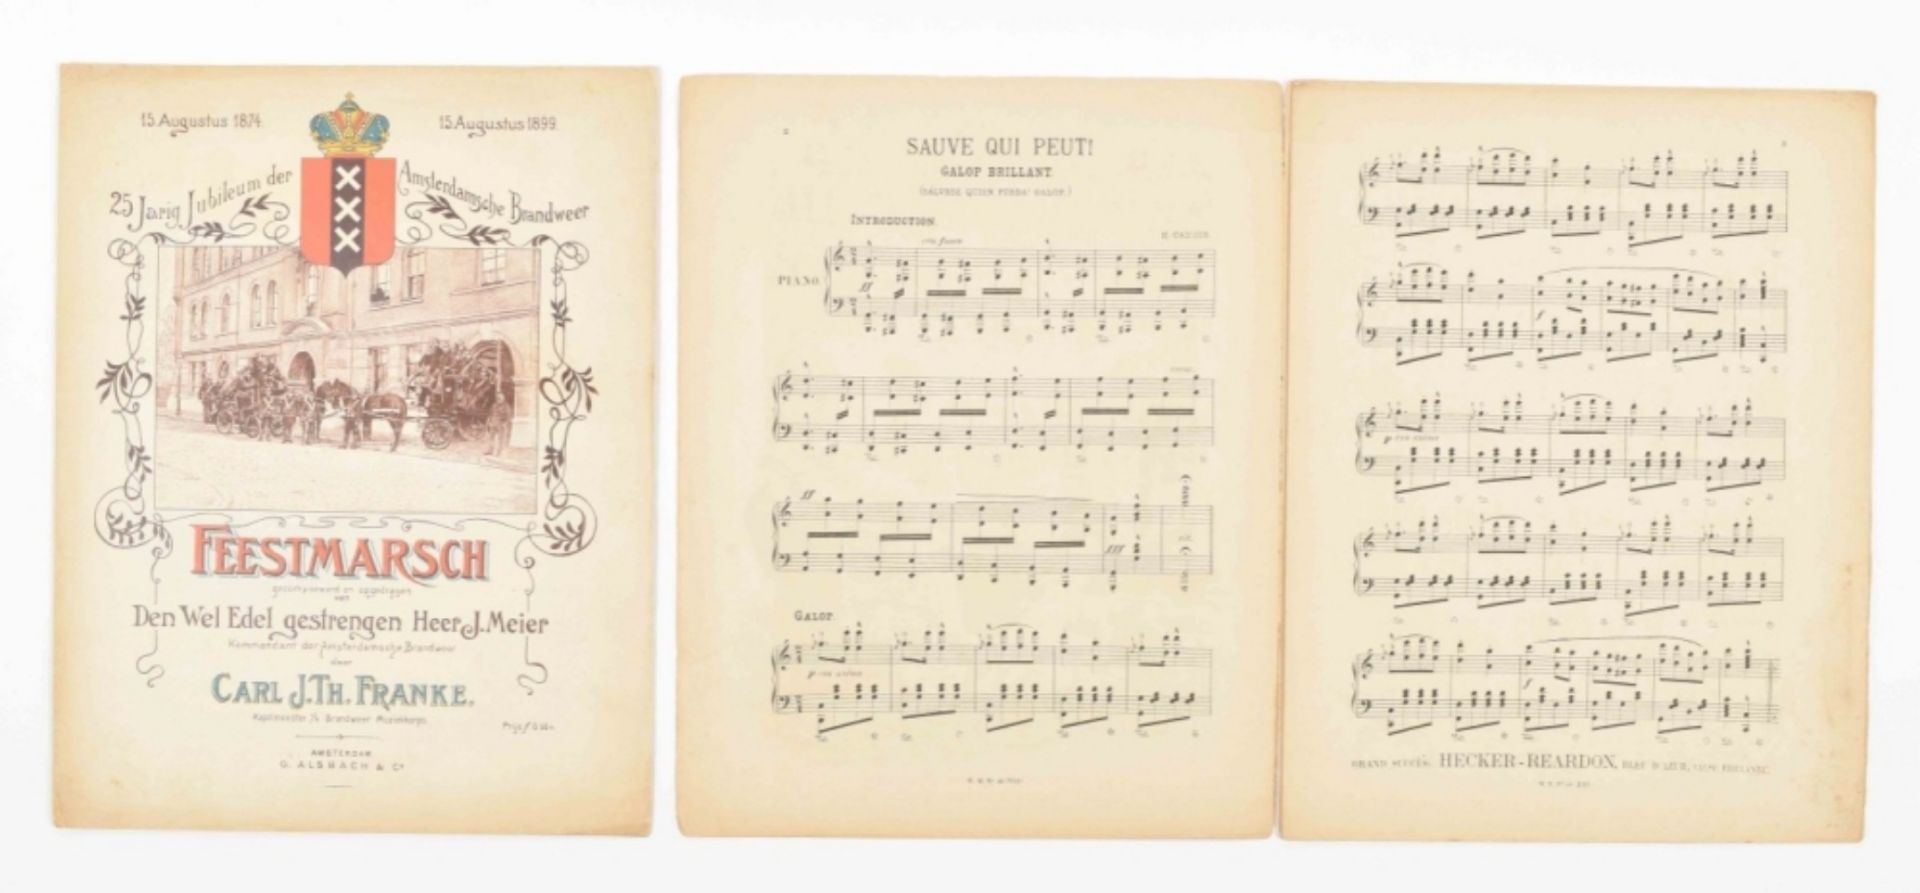 Collection of sheet music about fires and firemen - Image 5 of 5